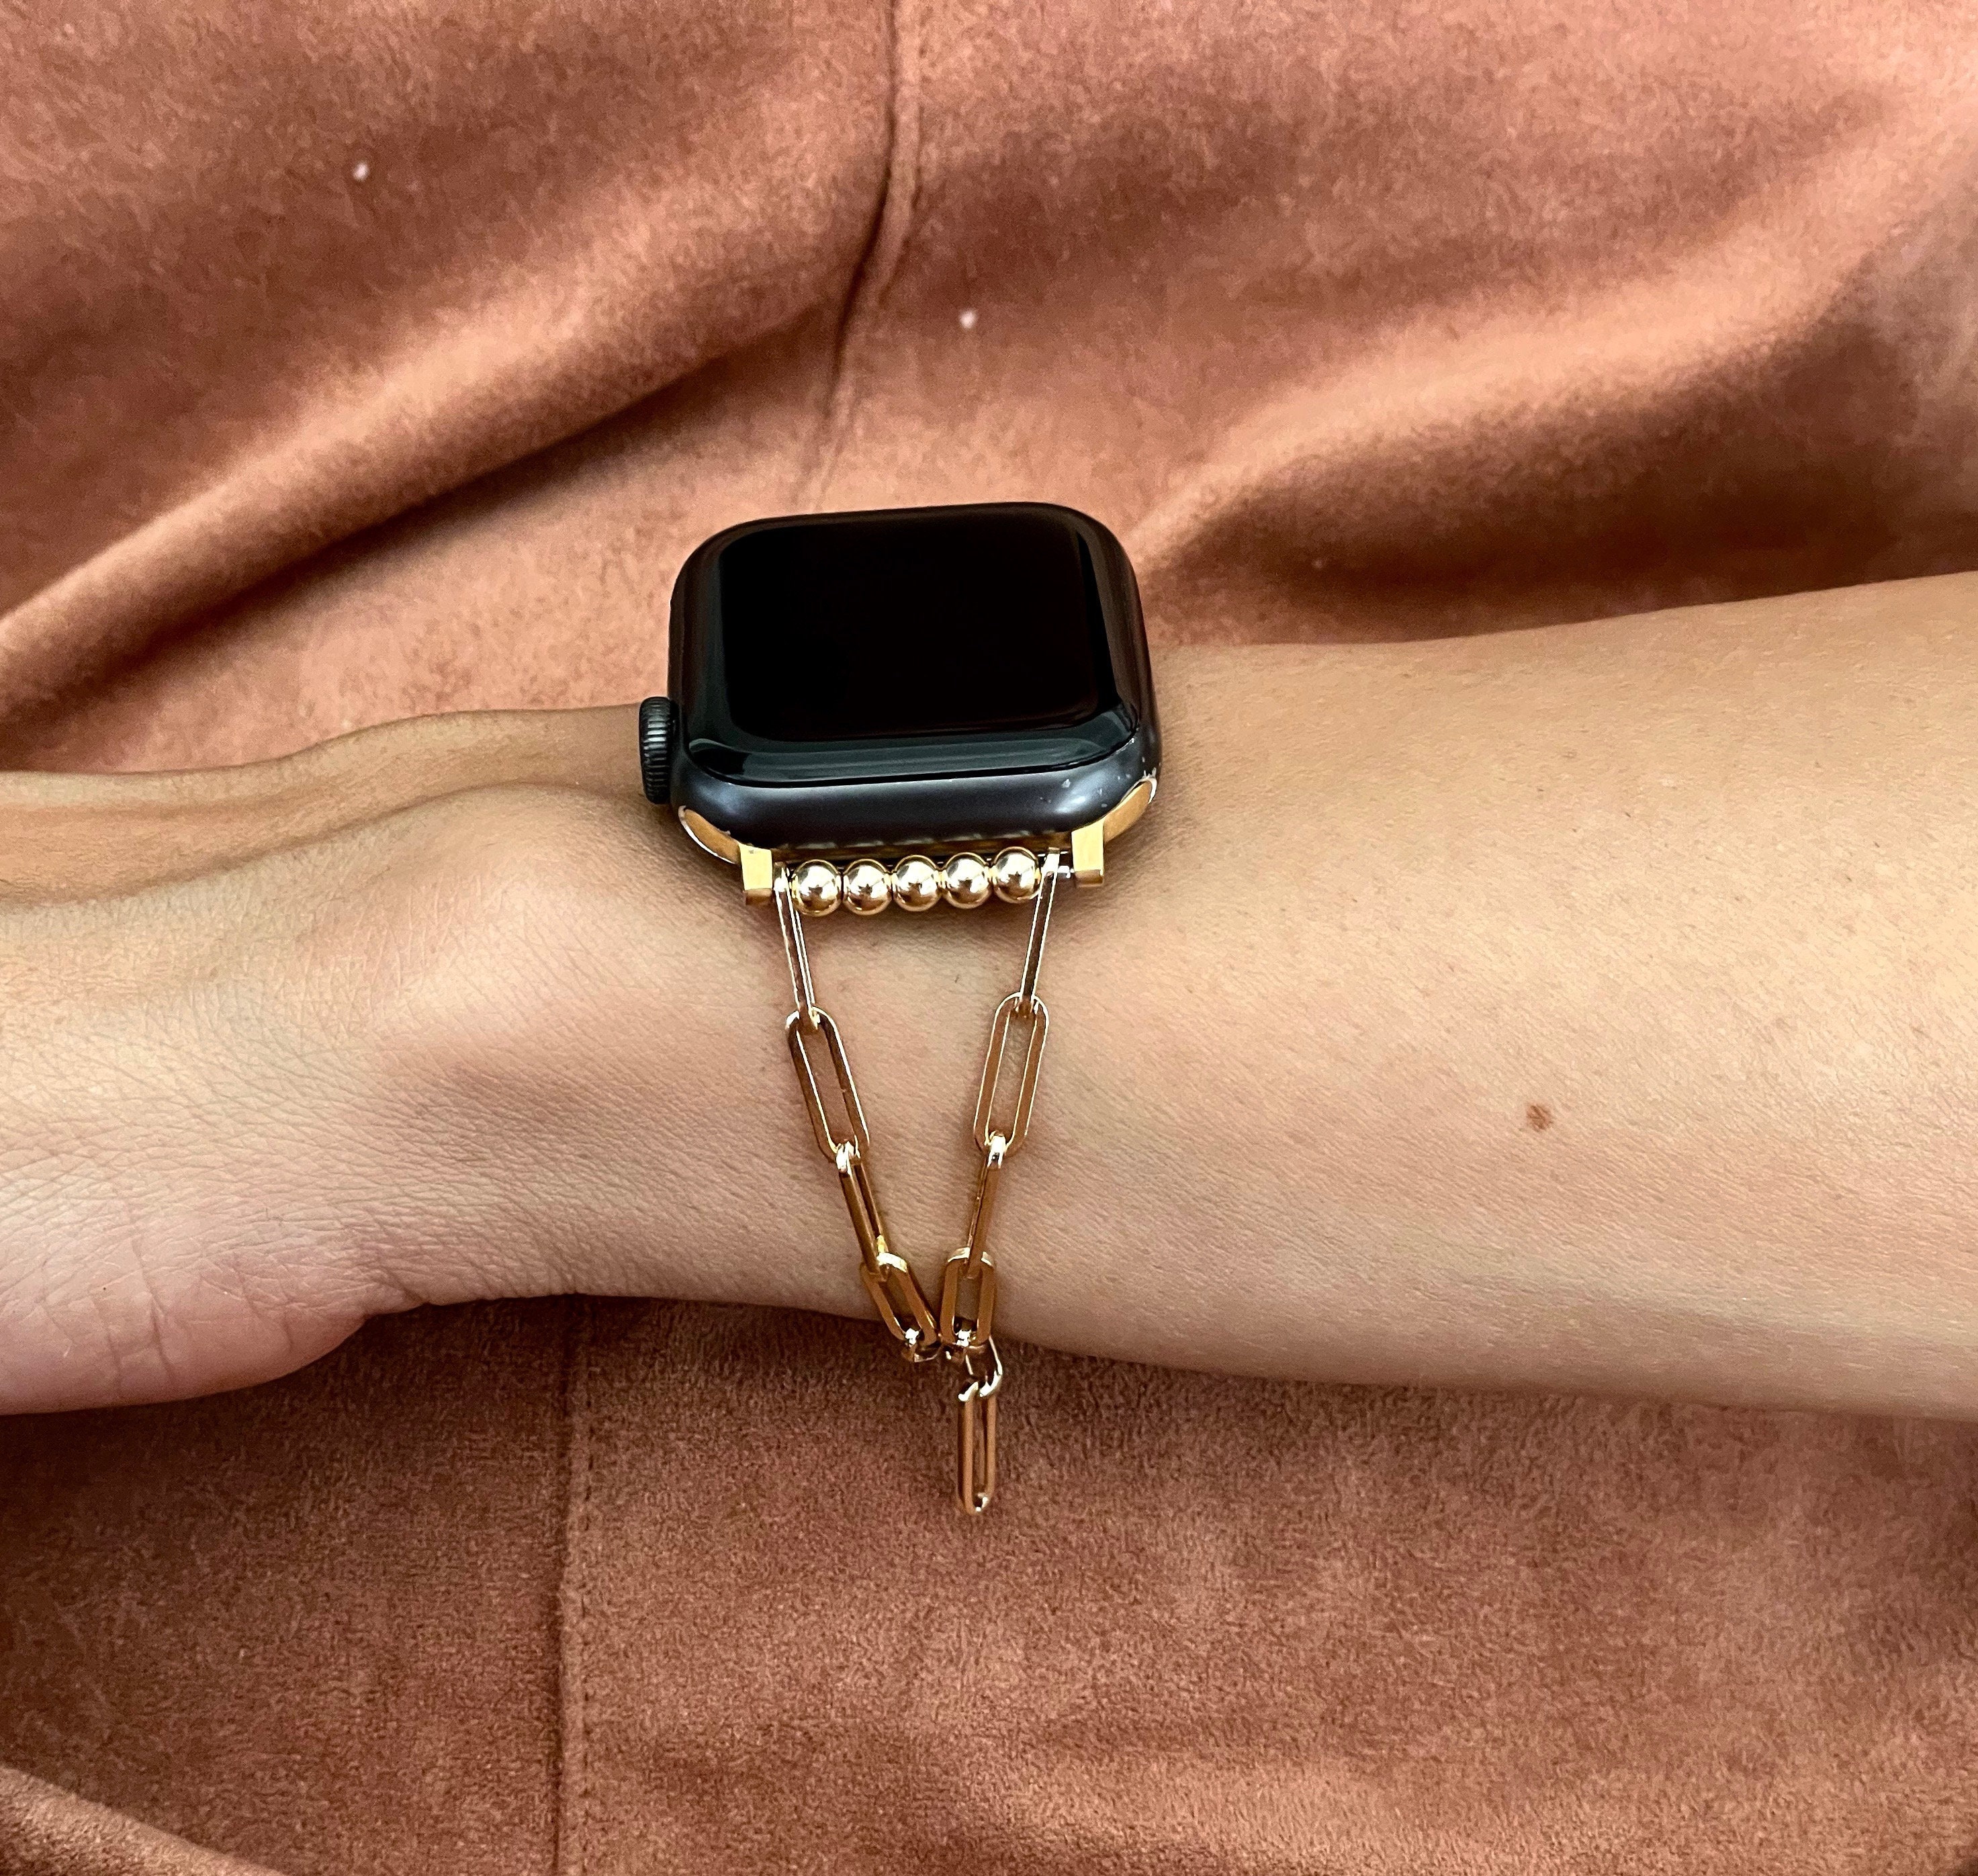 14K Gold Filled Apple Watch Band Iwatch Strap 40mm 41mm 42mm 44mm 45mm  Women Smart Watch Bracelet Apple Watchband Jewelry Gold Chain Armband 